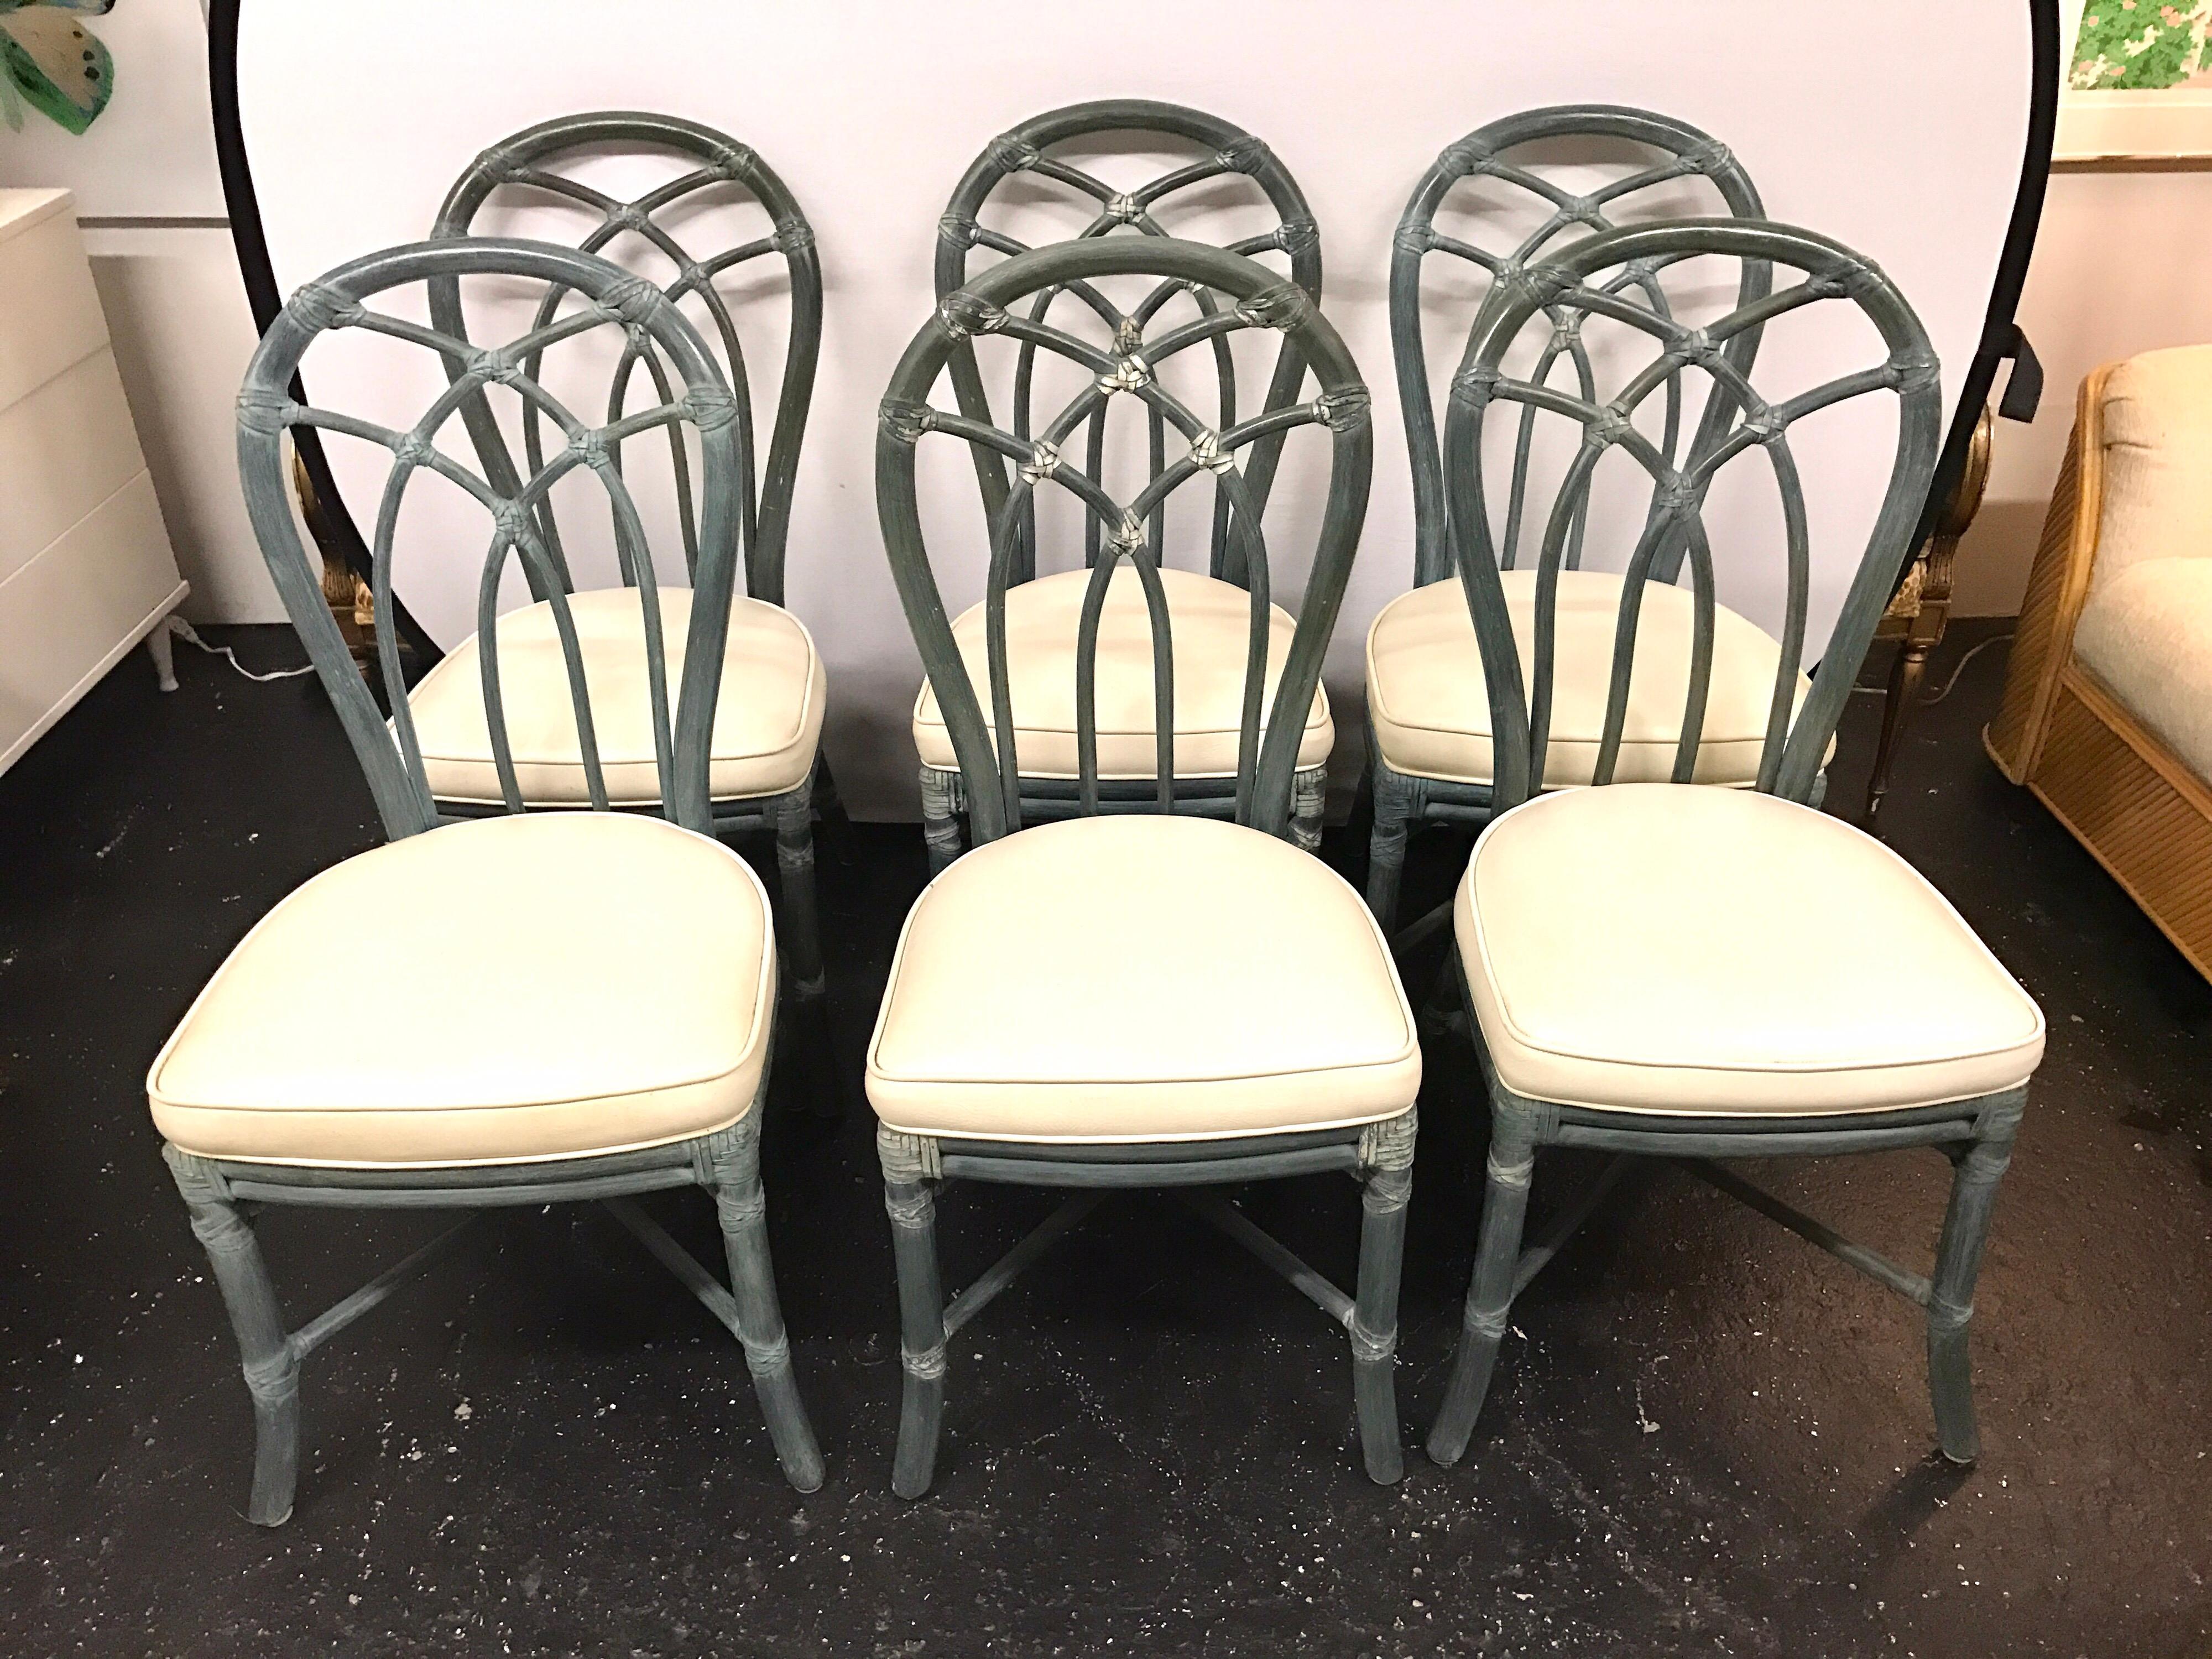 Set of six bamboo McGuire chairs in a painted blue gray finish and white faux leather seats. Brass McGuire plaque underneath seats. Excellent structural condition and only minor abrasions consistent with age.